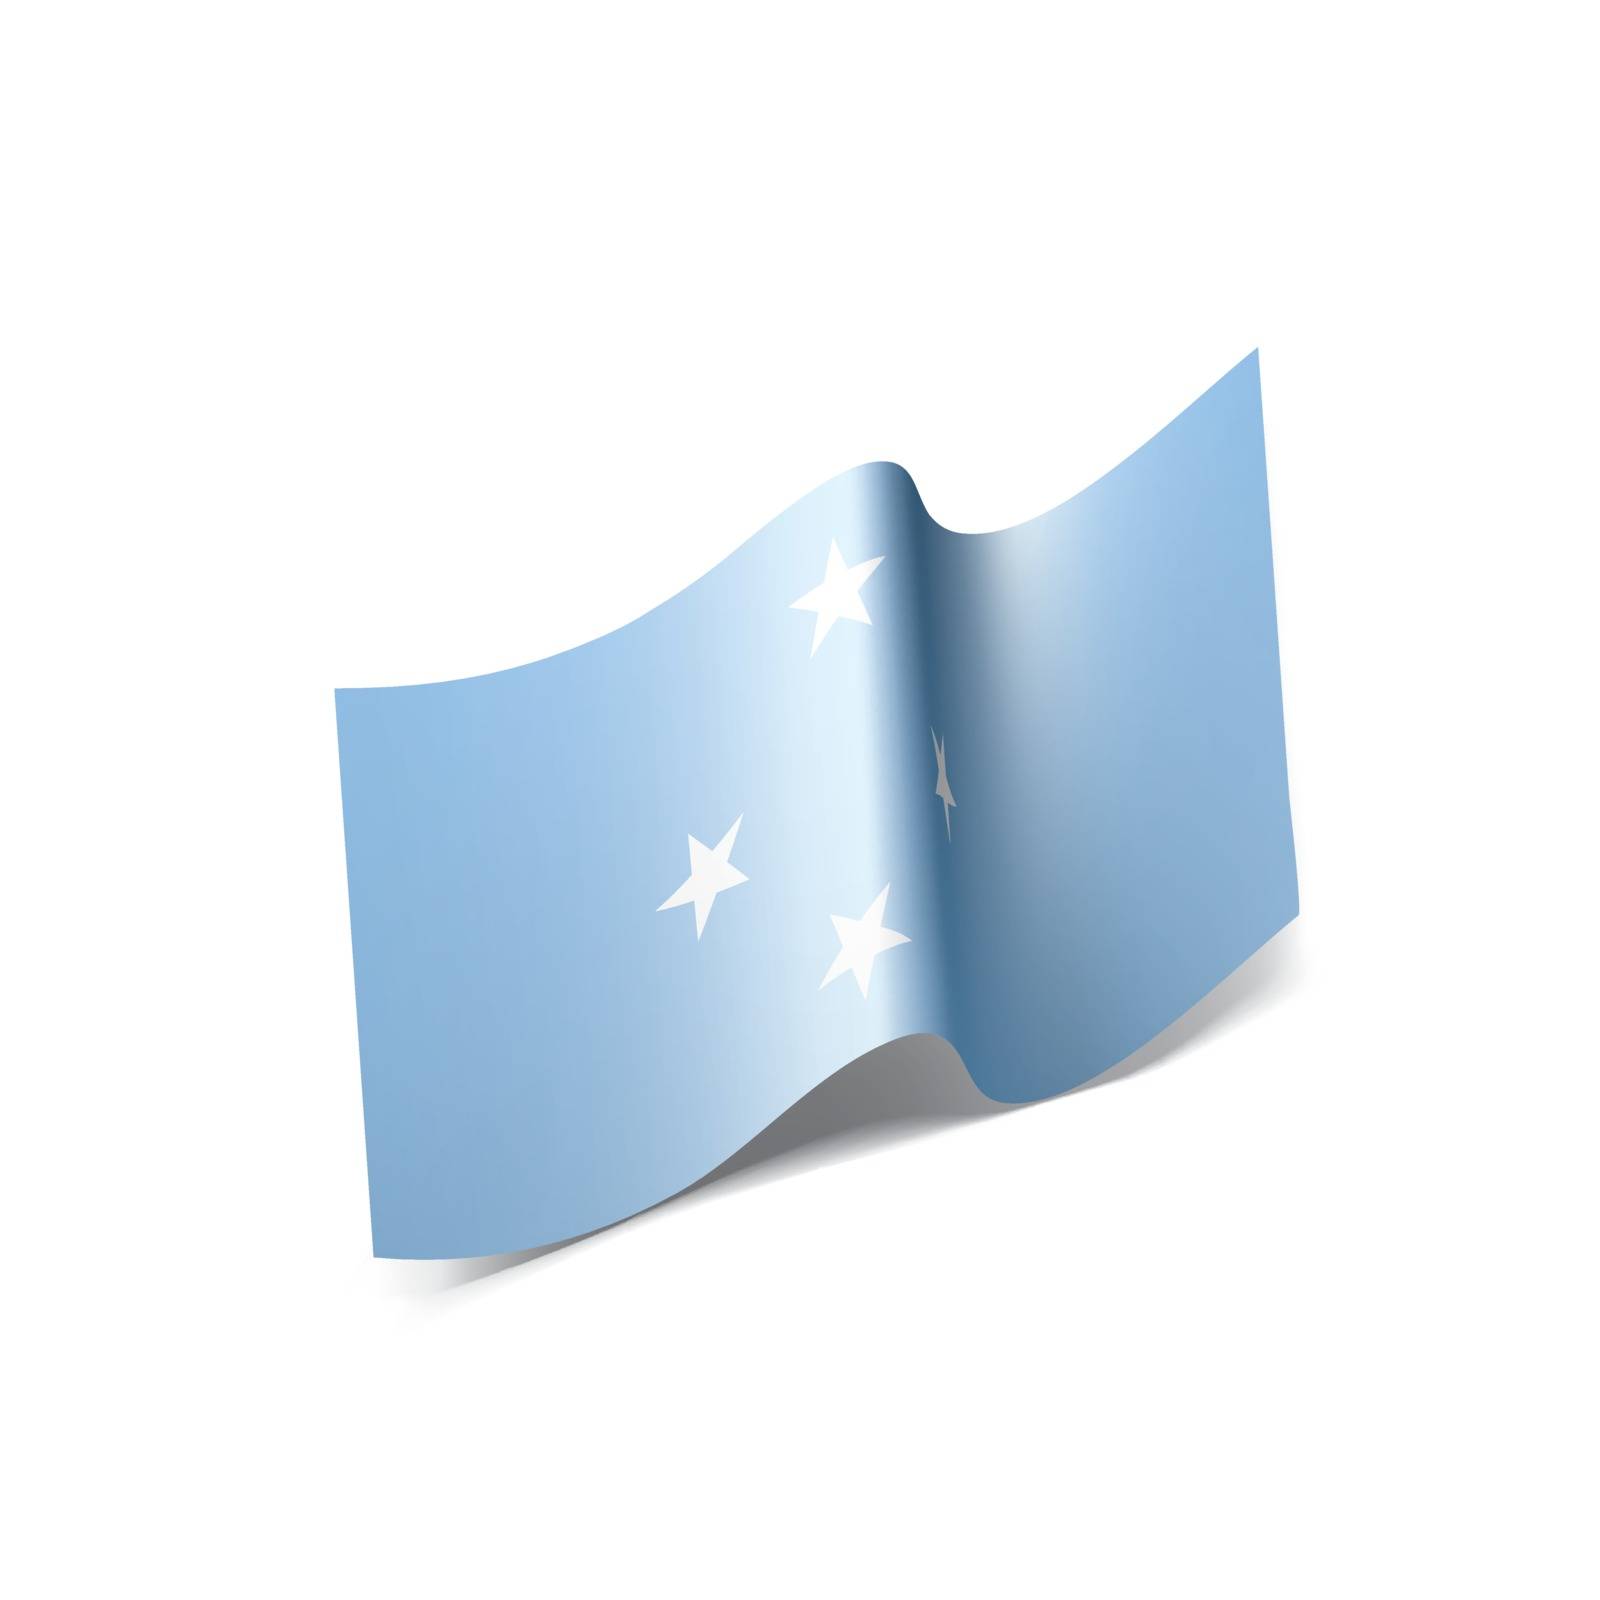 Federated States Micronesia flag by butenkow